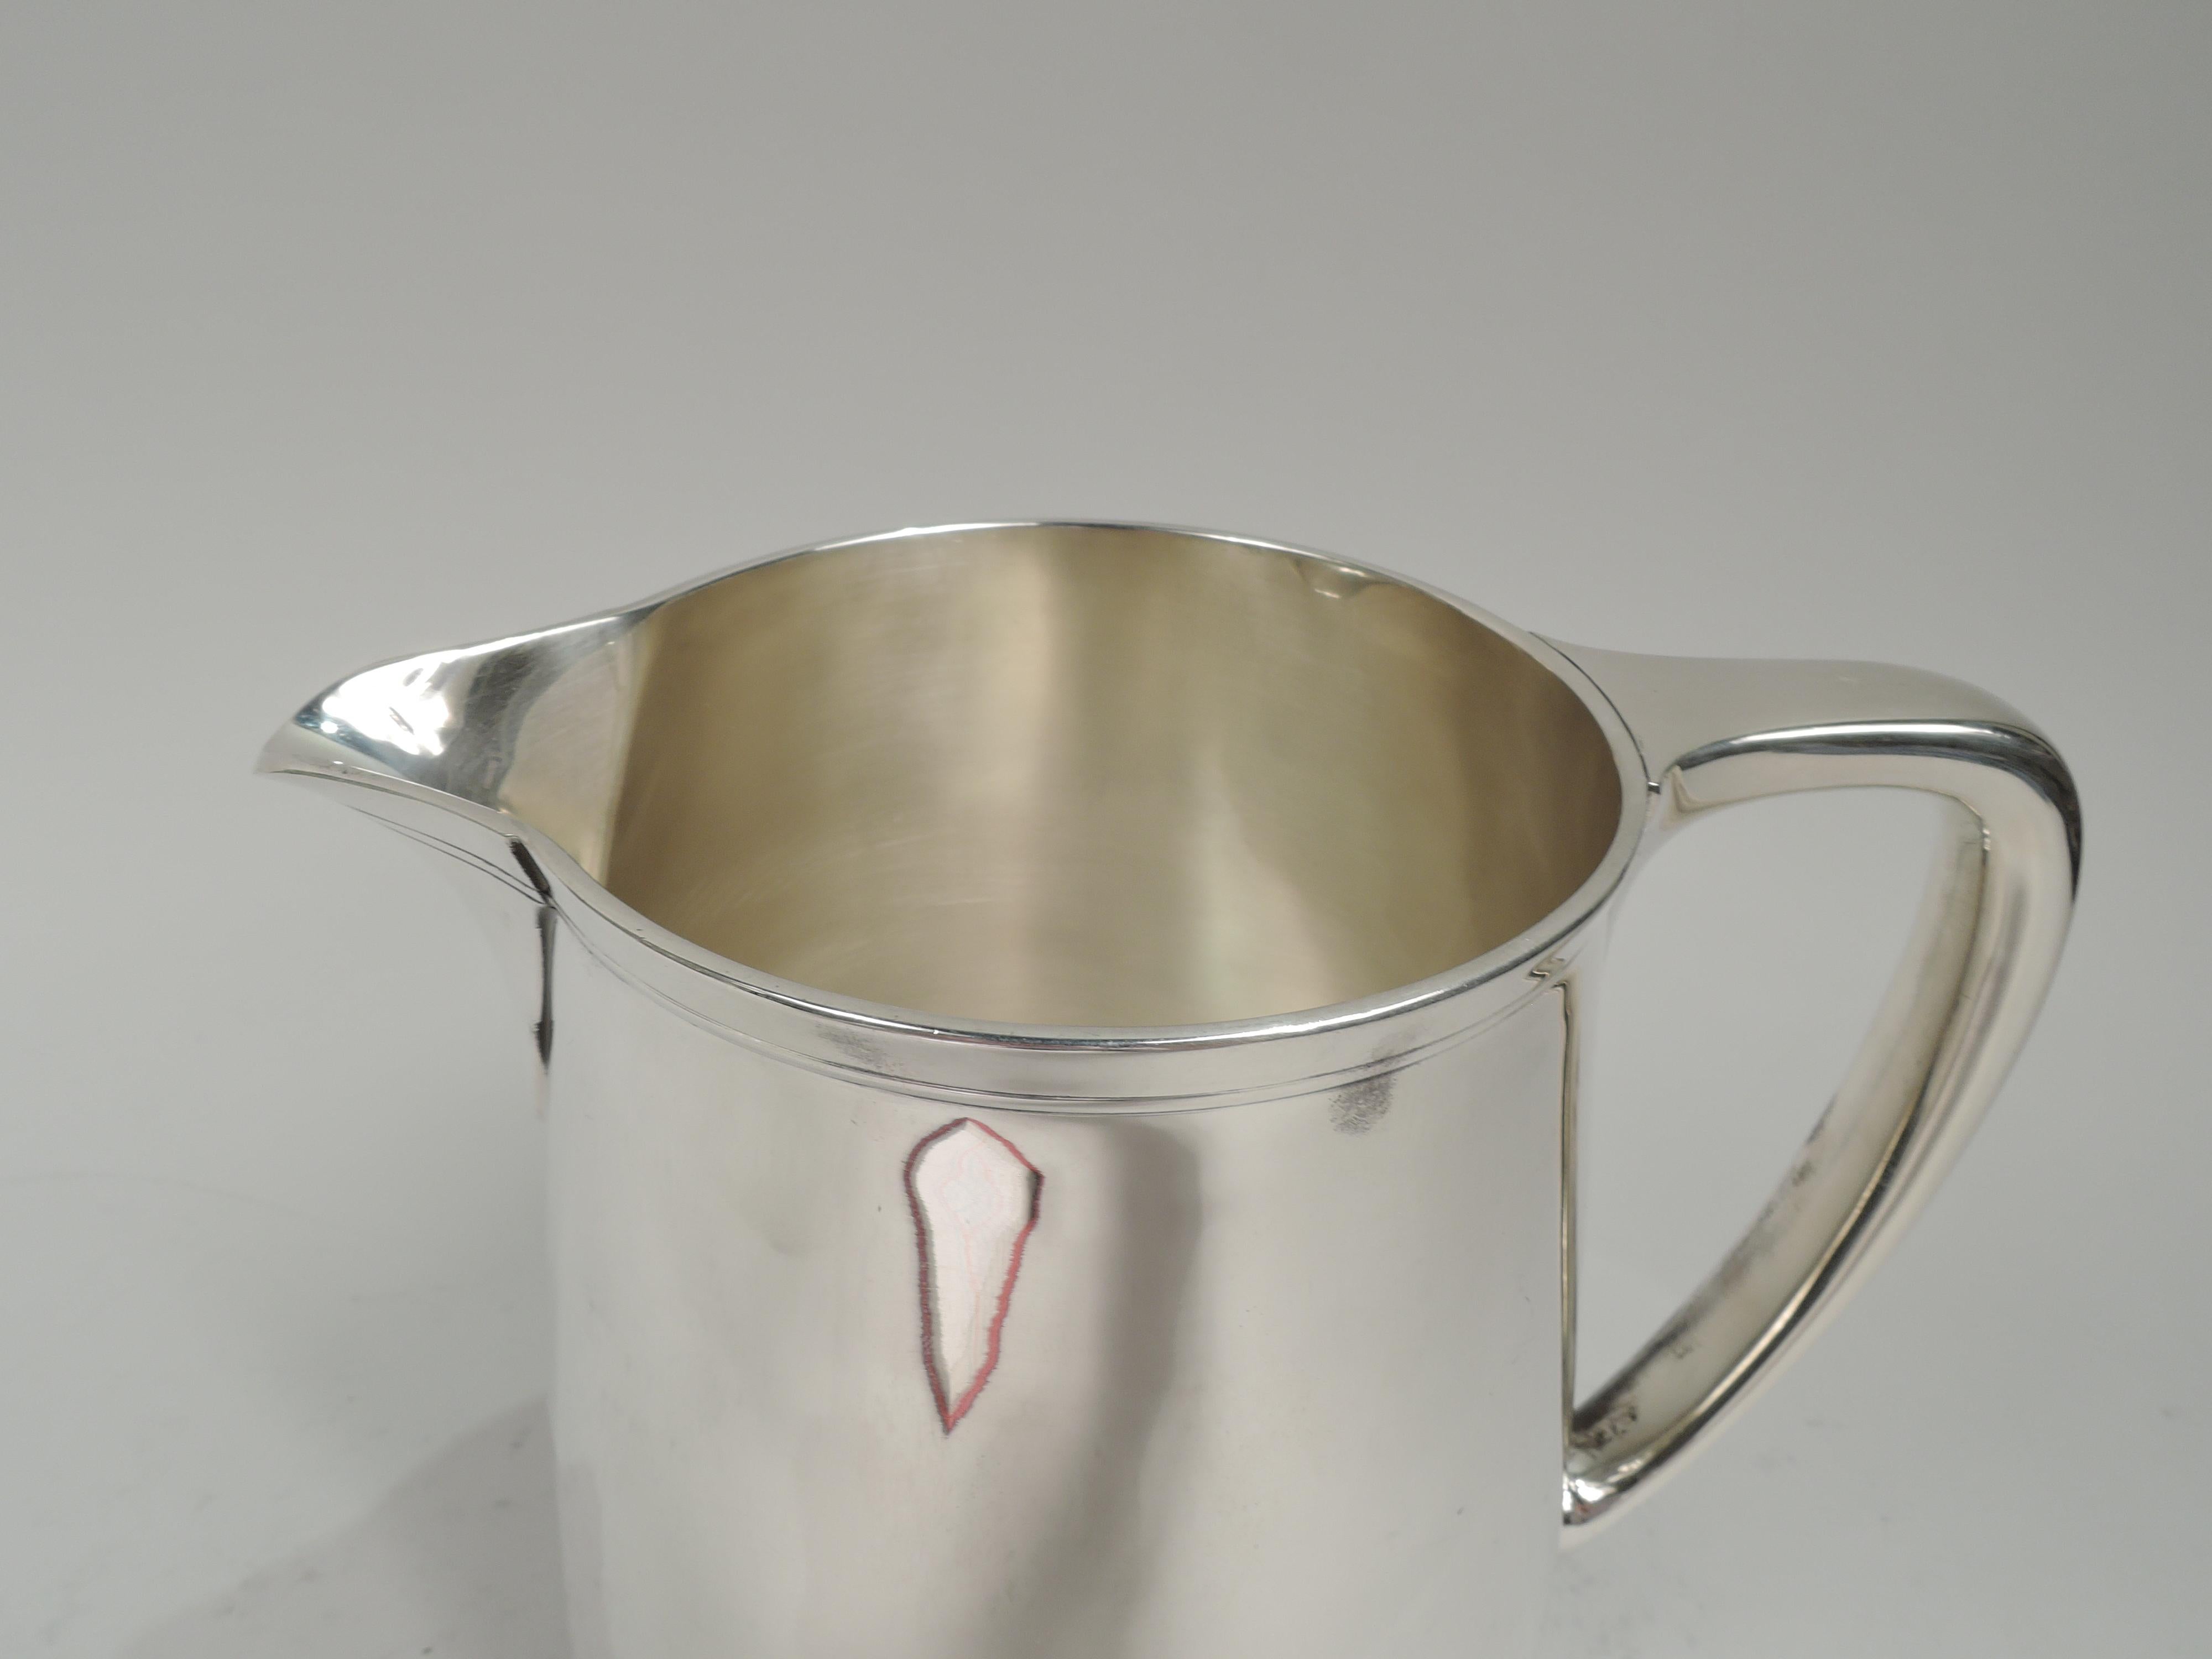 Modern sterling silver water pitcher. Made by Tiffany & Co. in New York, ca 1923. Upward tapering sides, scrolled bracket handle, and v-spout. Spare incised banding near rim. Fully marked including maker’s stamp, pattern no. 20210 (first produced in